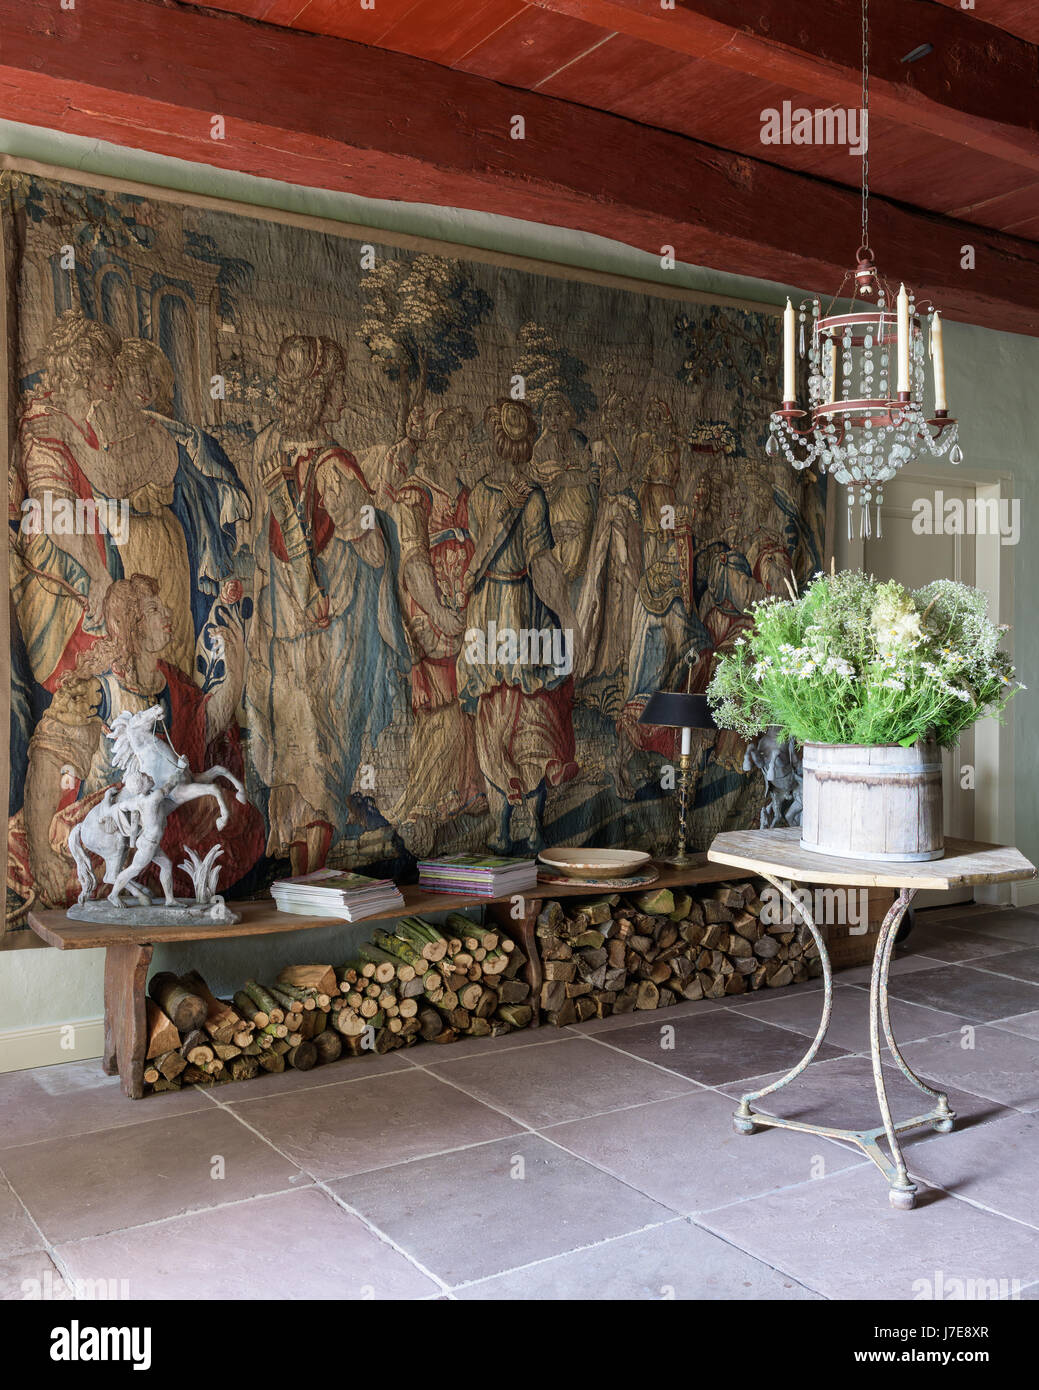 17th century Flemish tapestry 'Triumph of Diana' with cafe table and French mid-19th century glass chandelier Stock Photo